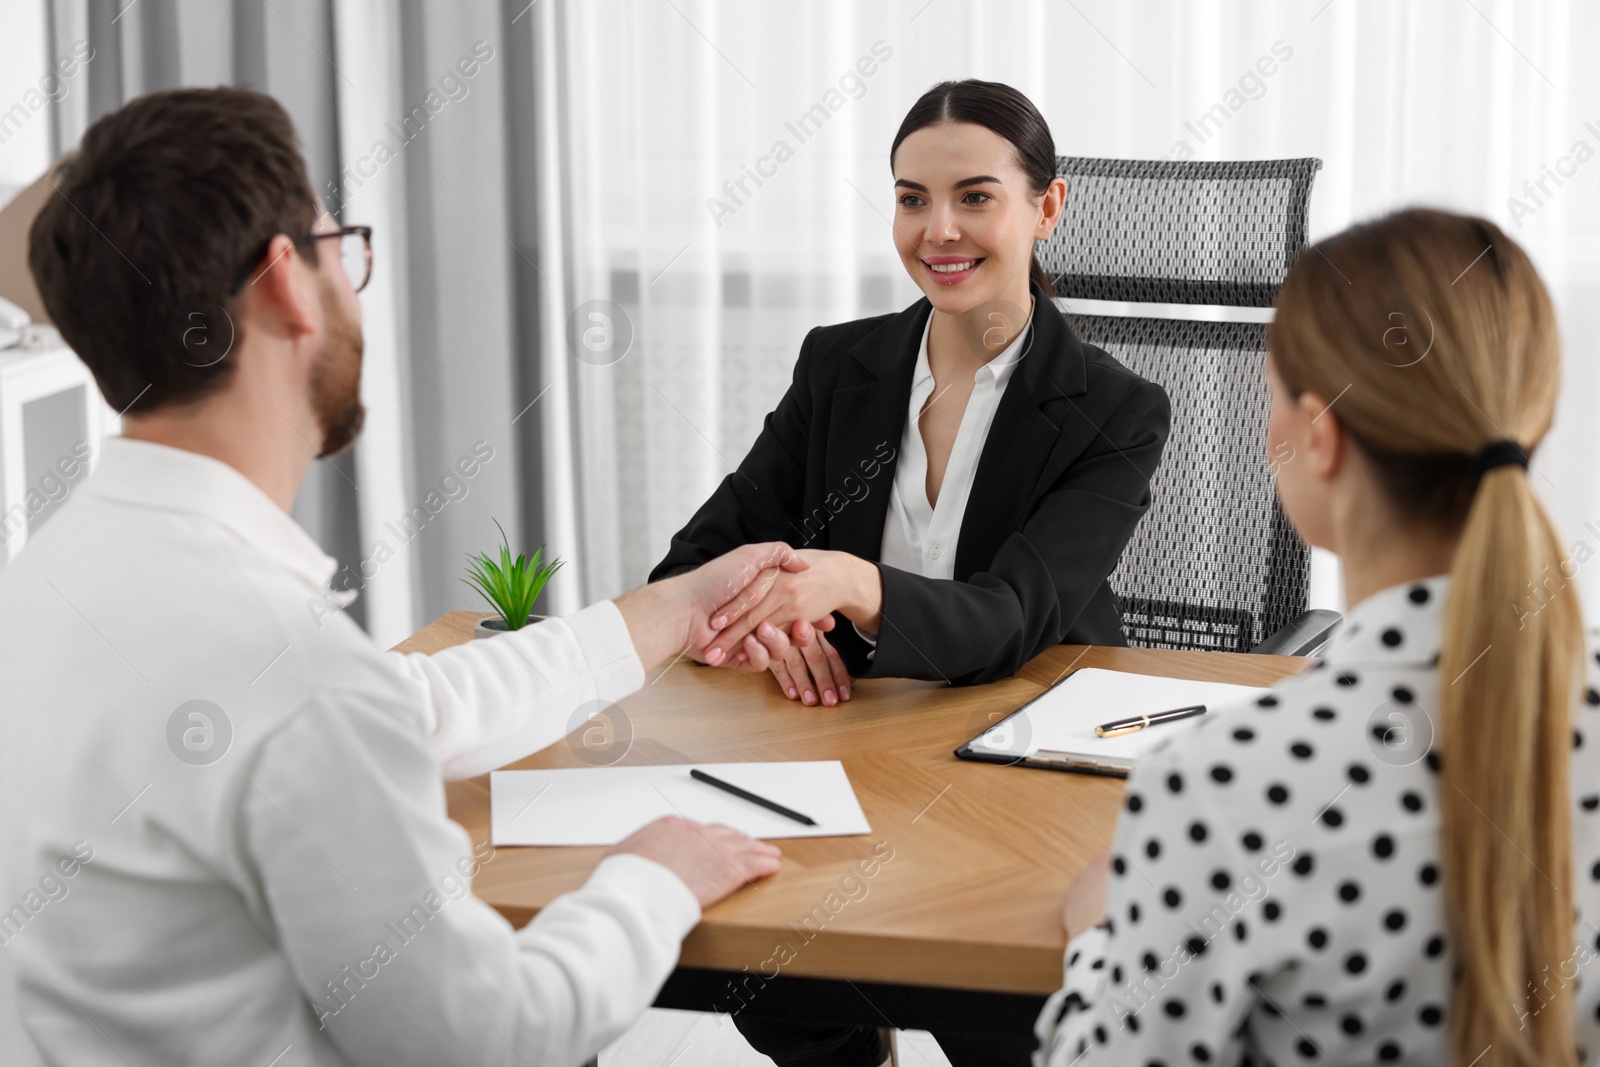 Photo of Lawyer shaking hands with clients in office